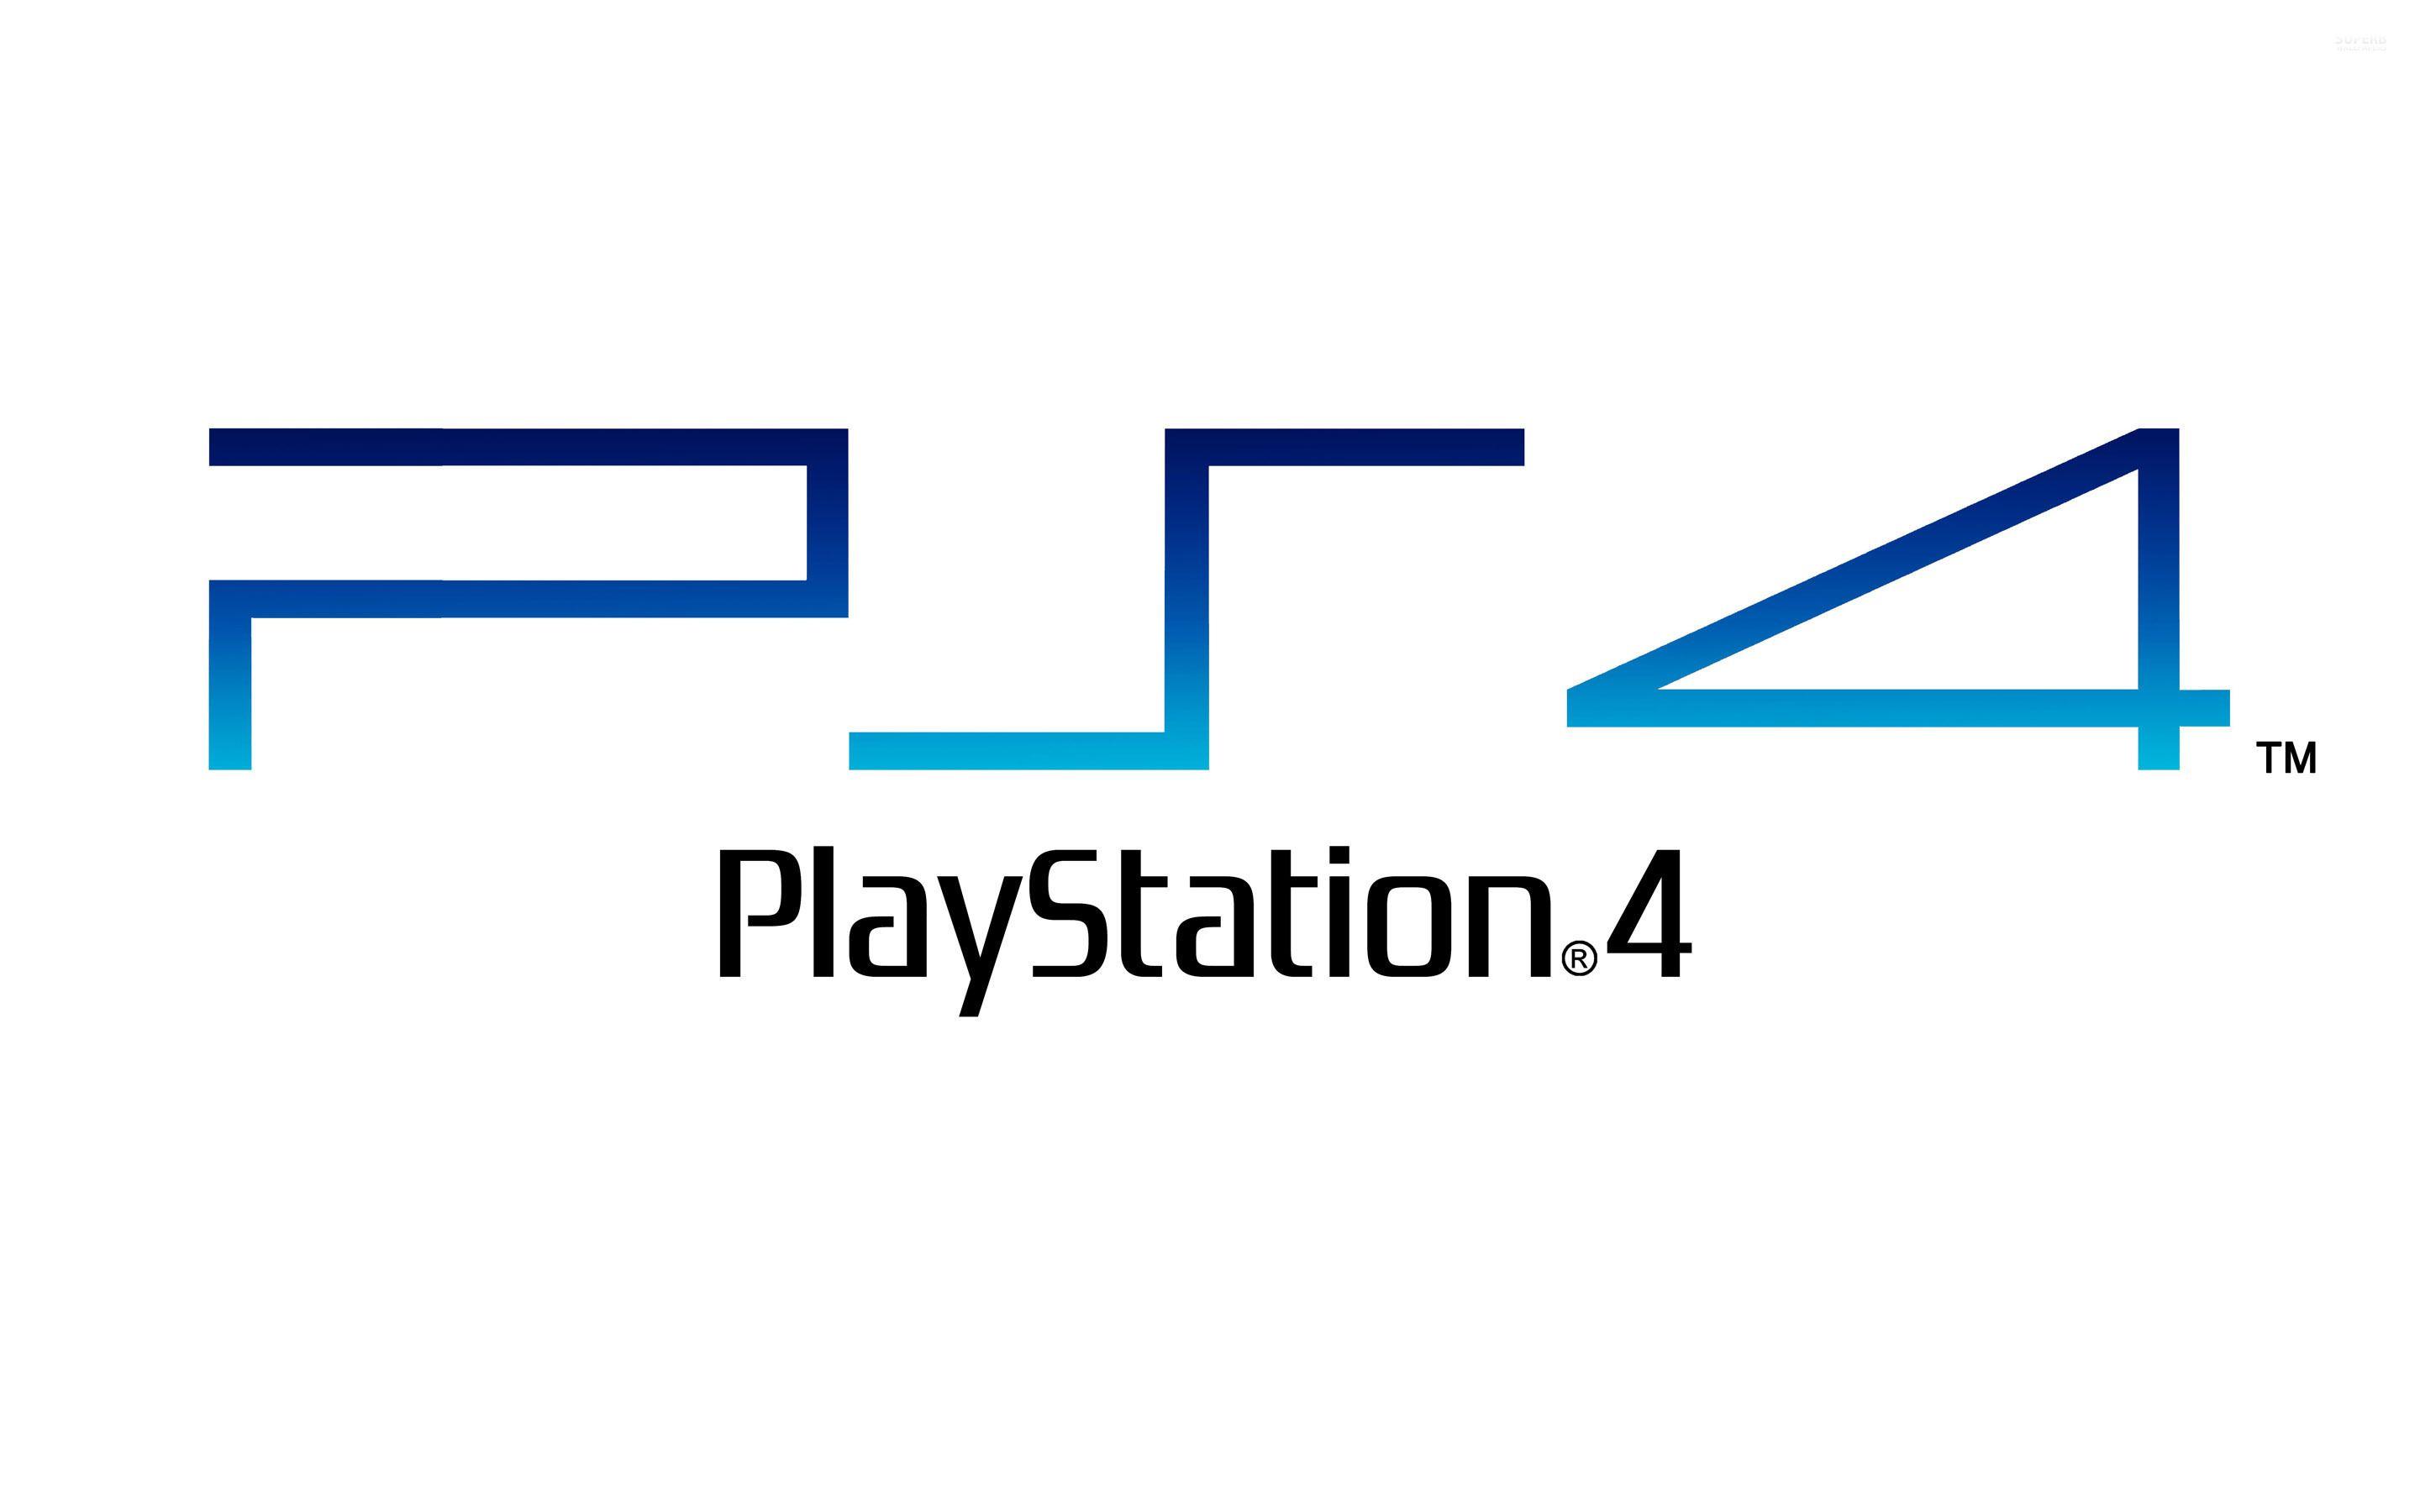 Sony PlayStation Logo - Sony PlayStation 4 Wallpapers, Pictures, Images